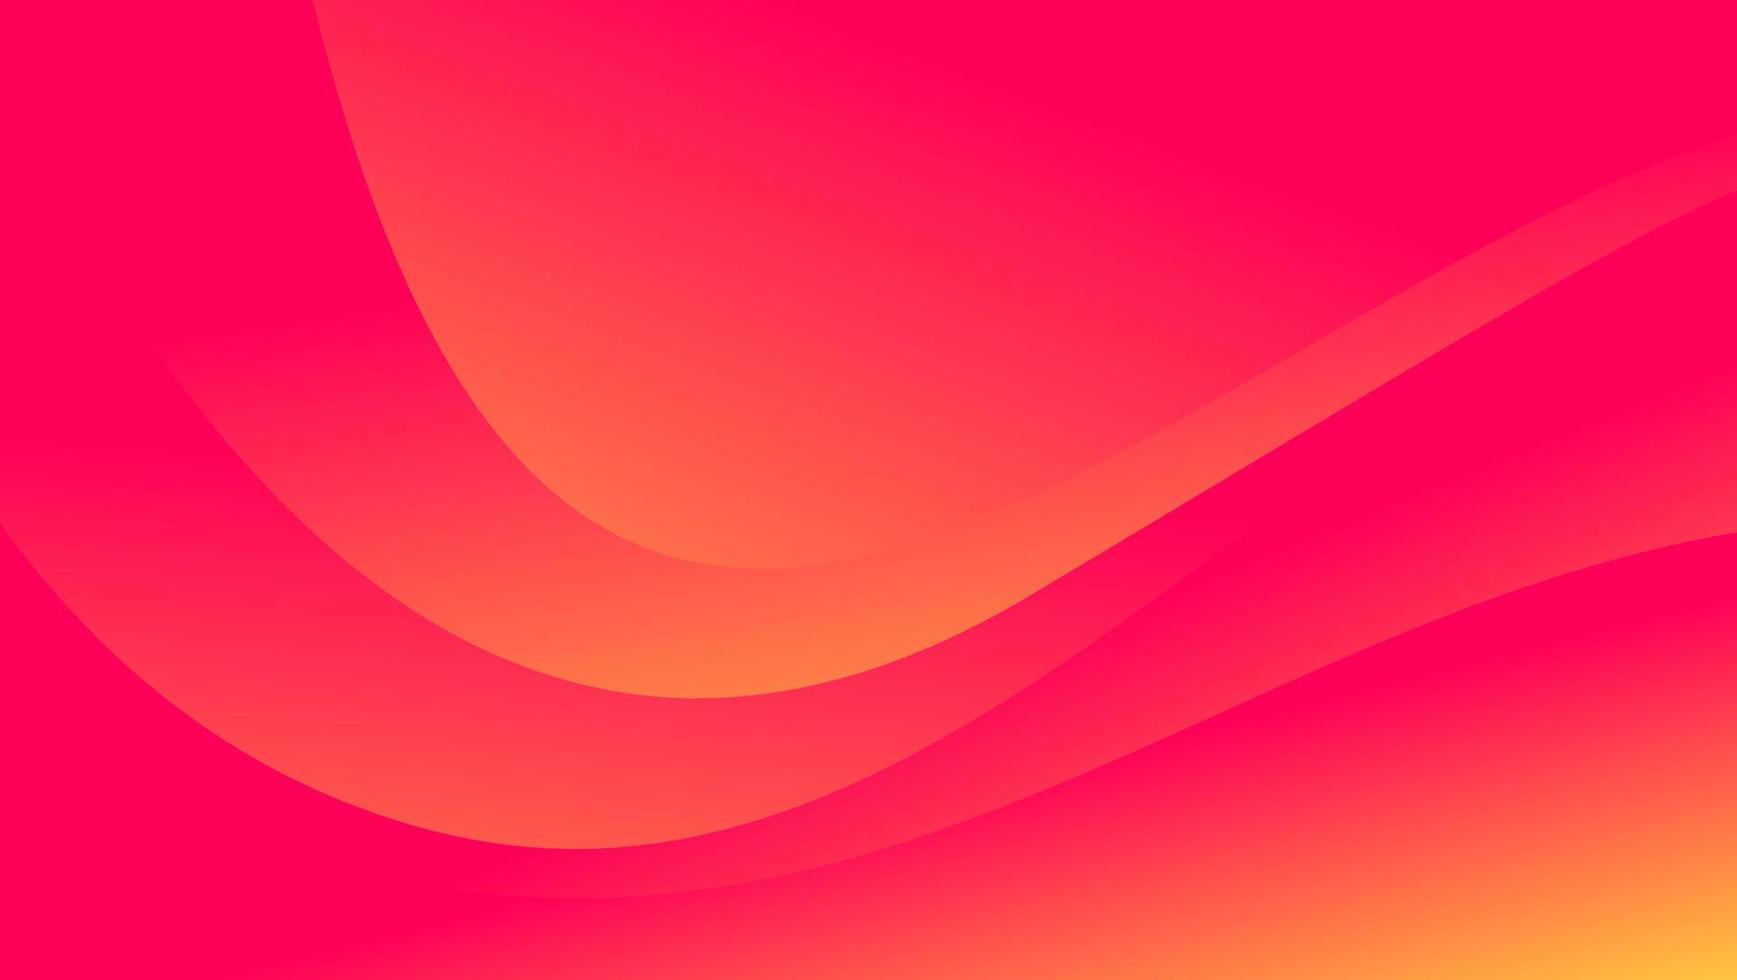 abstract fluid wave on gradient red and yellow background vector